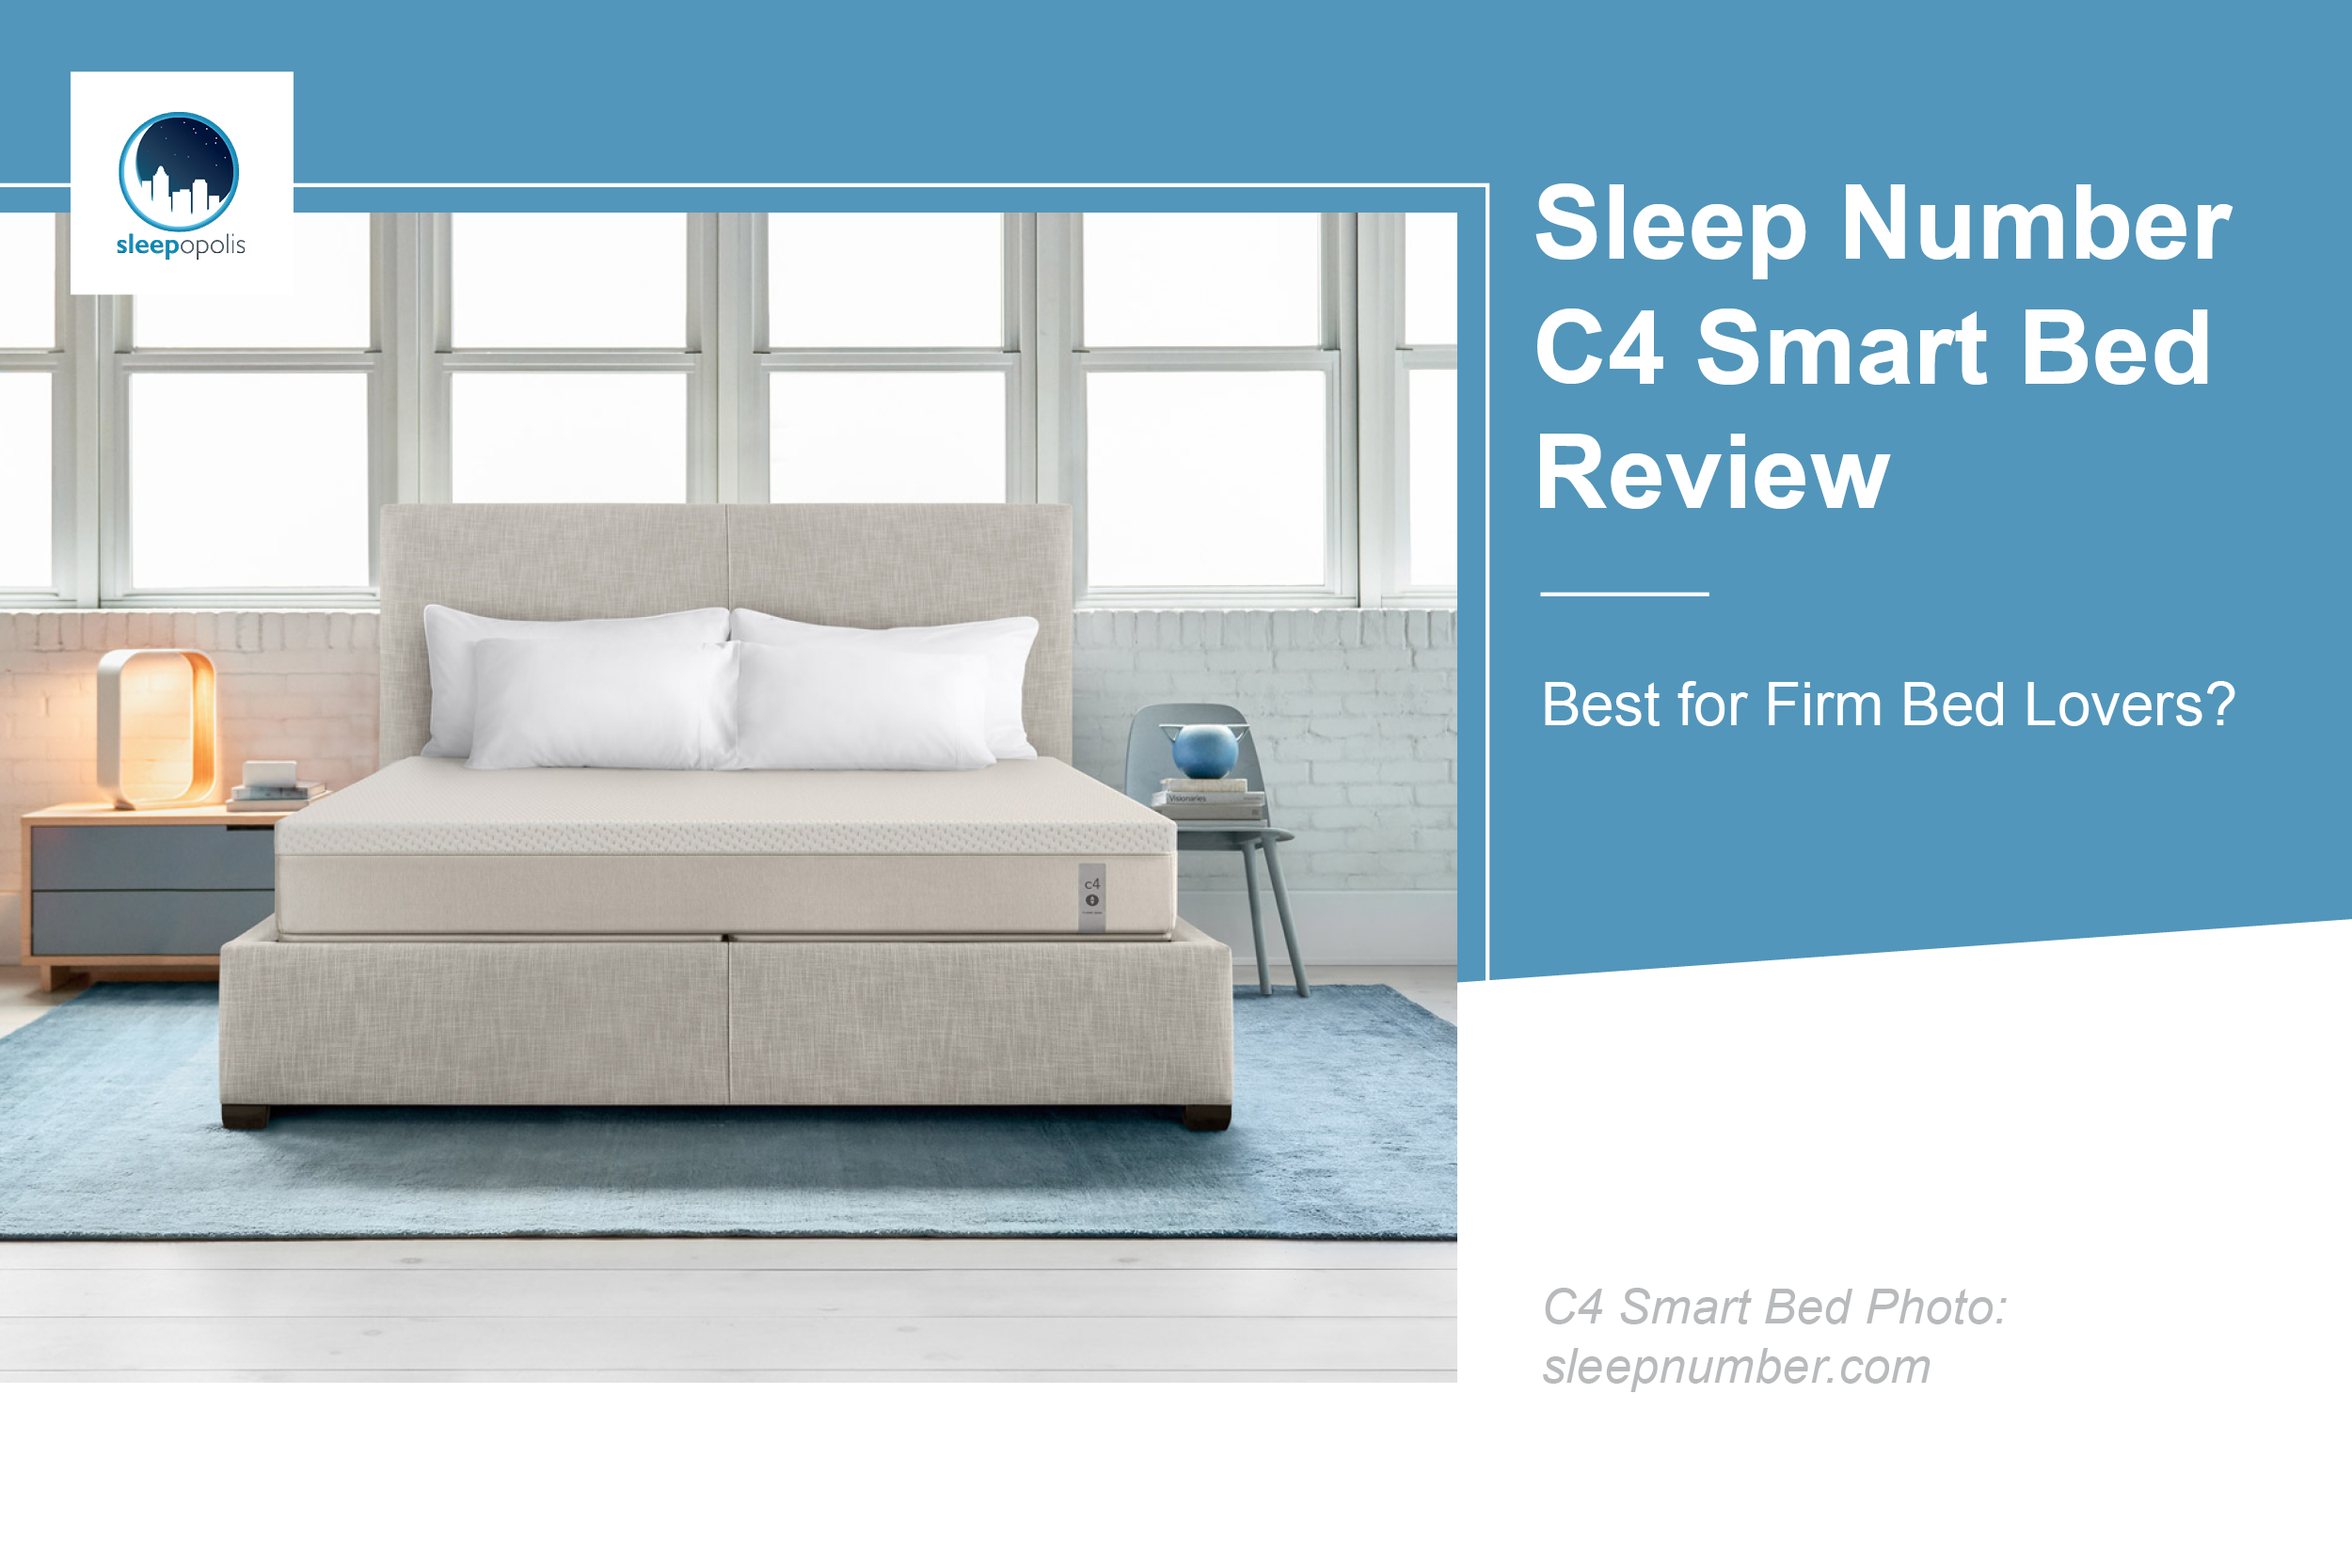 Sleep Number 360 C4 Smart Bed Review, Sleep Number 360 Smart Bed King Cost